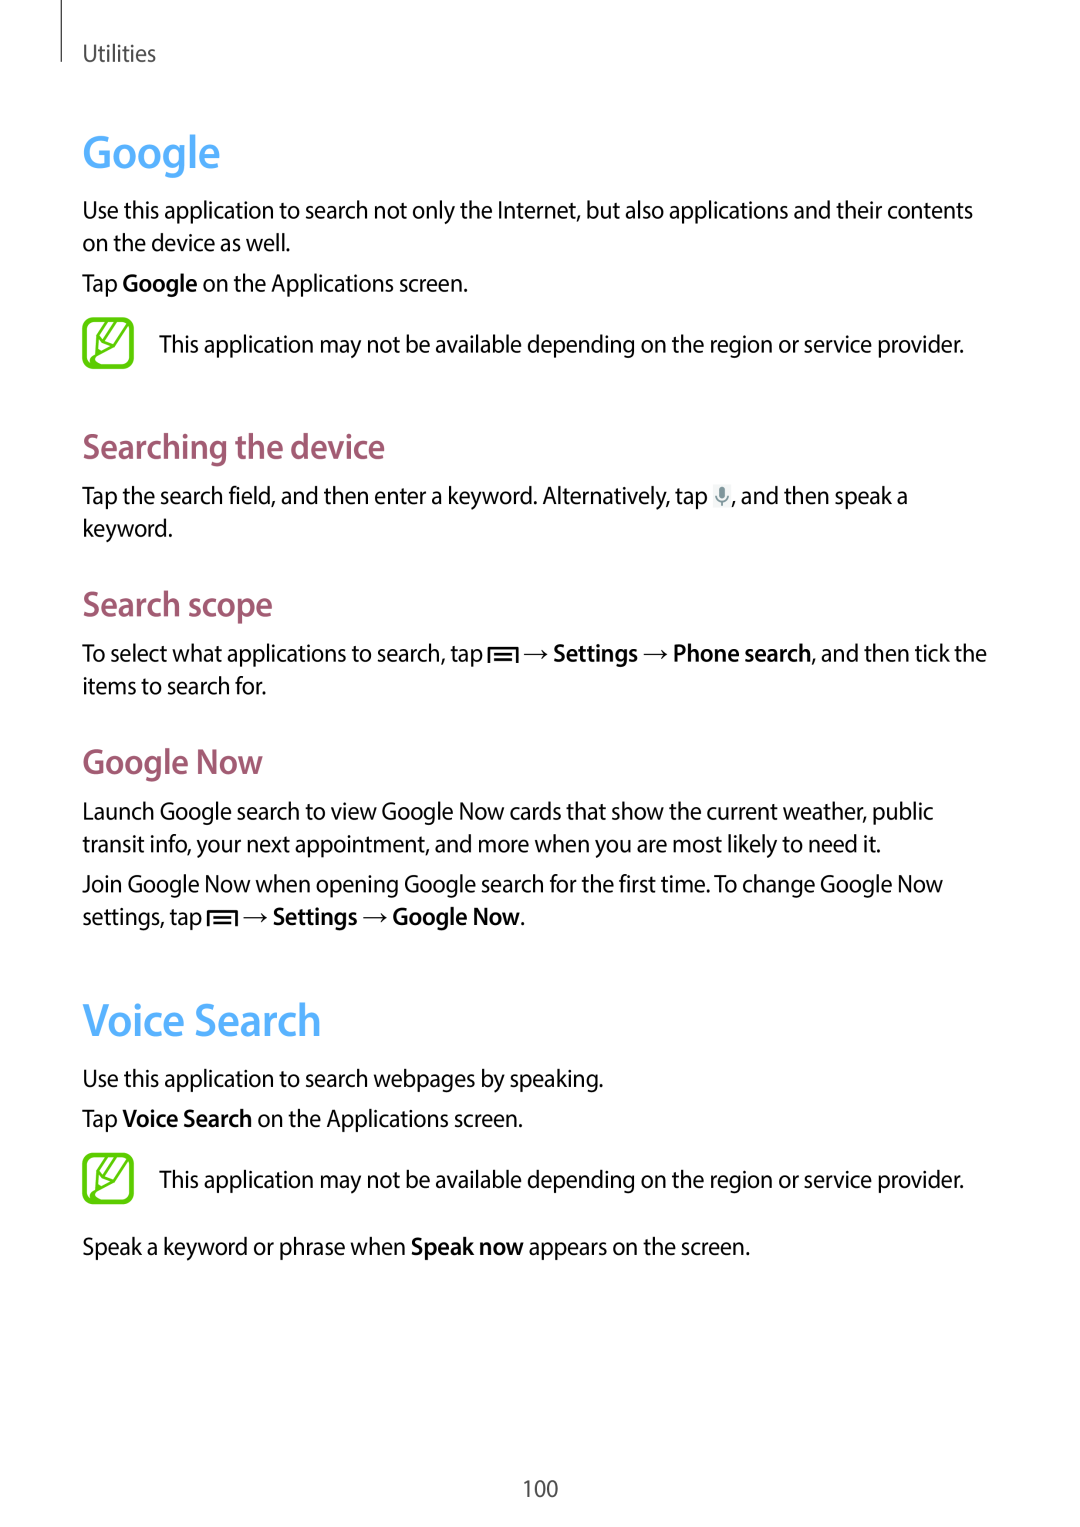 Samsung SM-G7105ZWAXEF, SM-G7105ZKAATO manual Voice Search, Searching the device, Search scope, Google Now, Utilities 